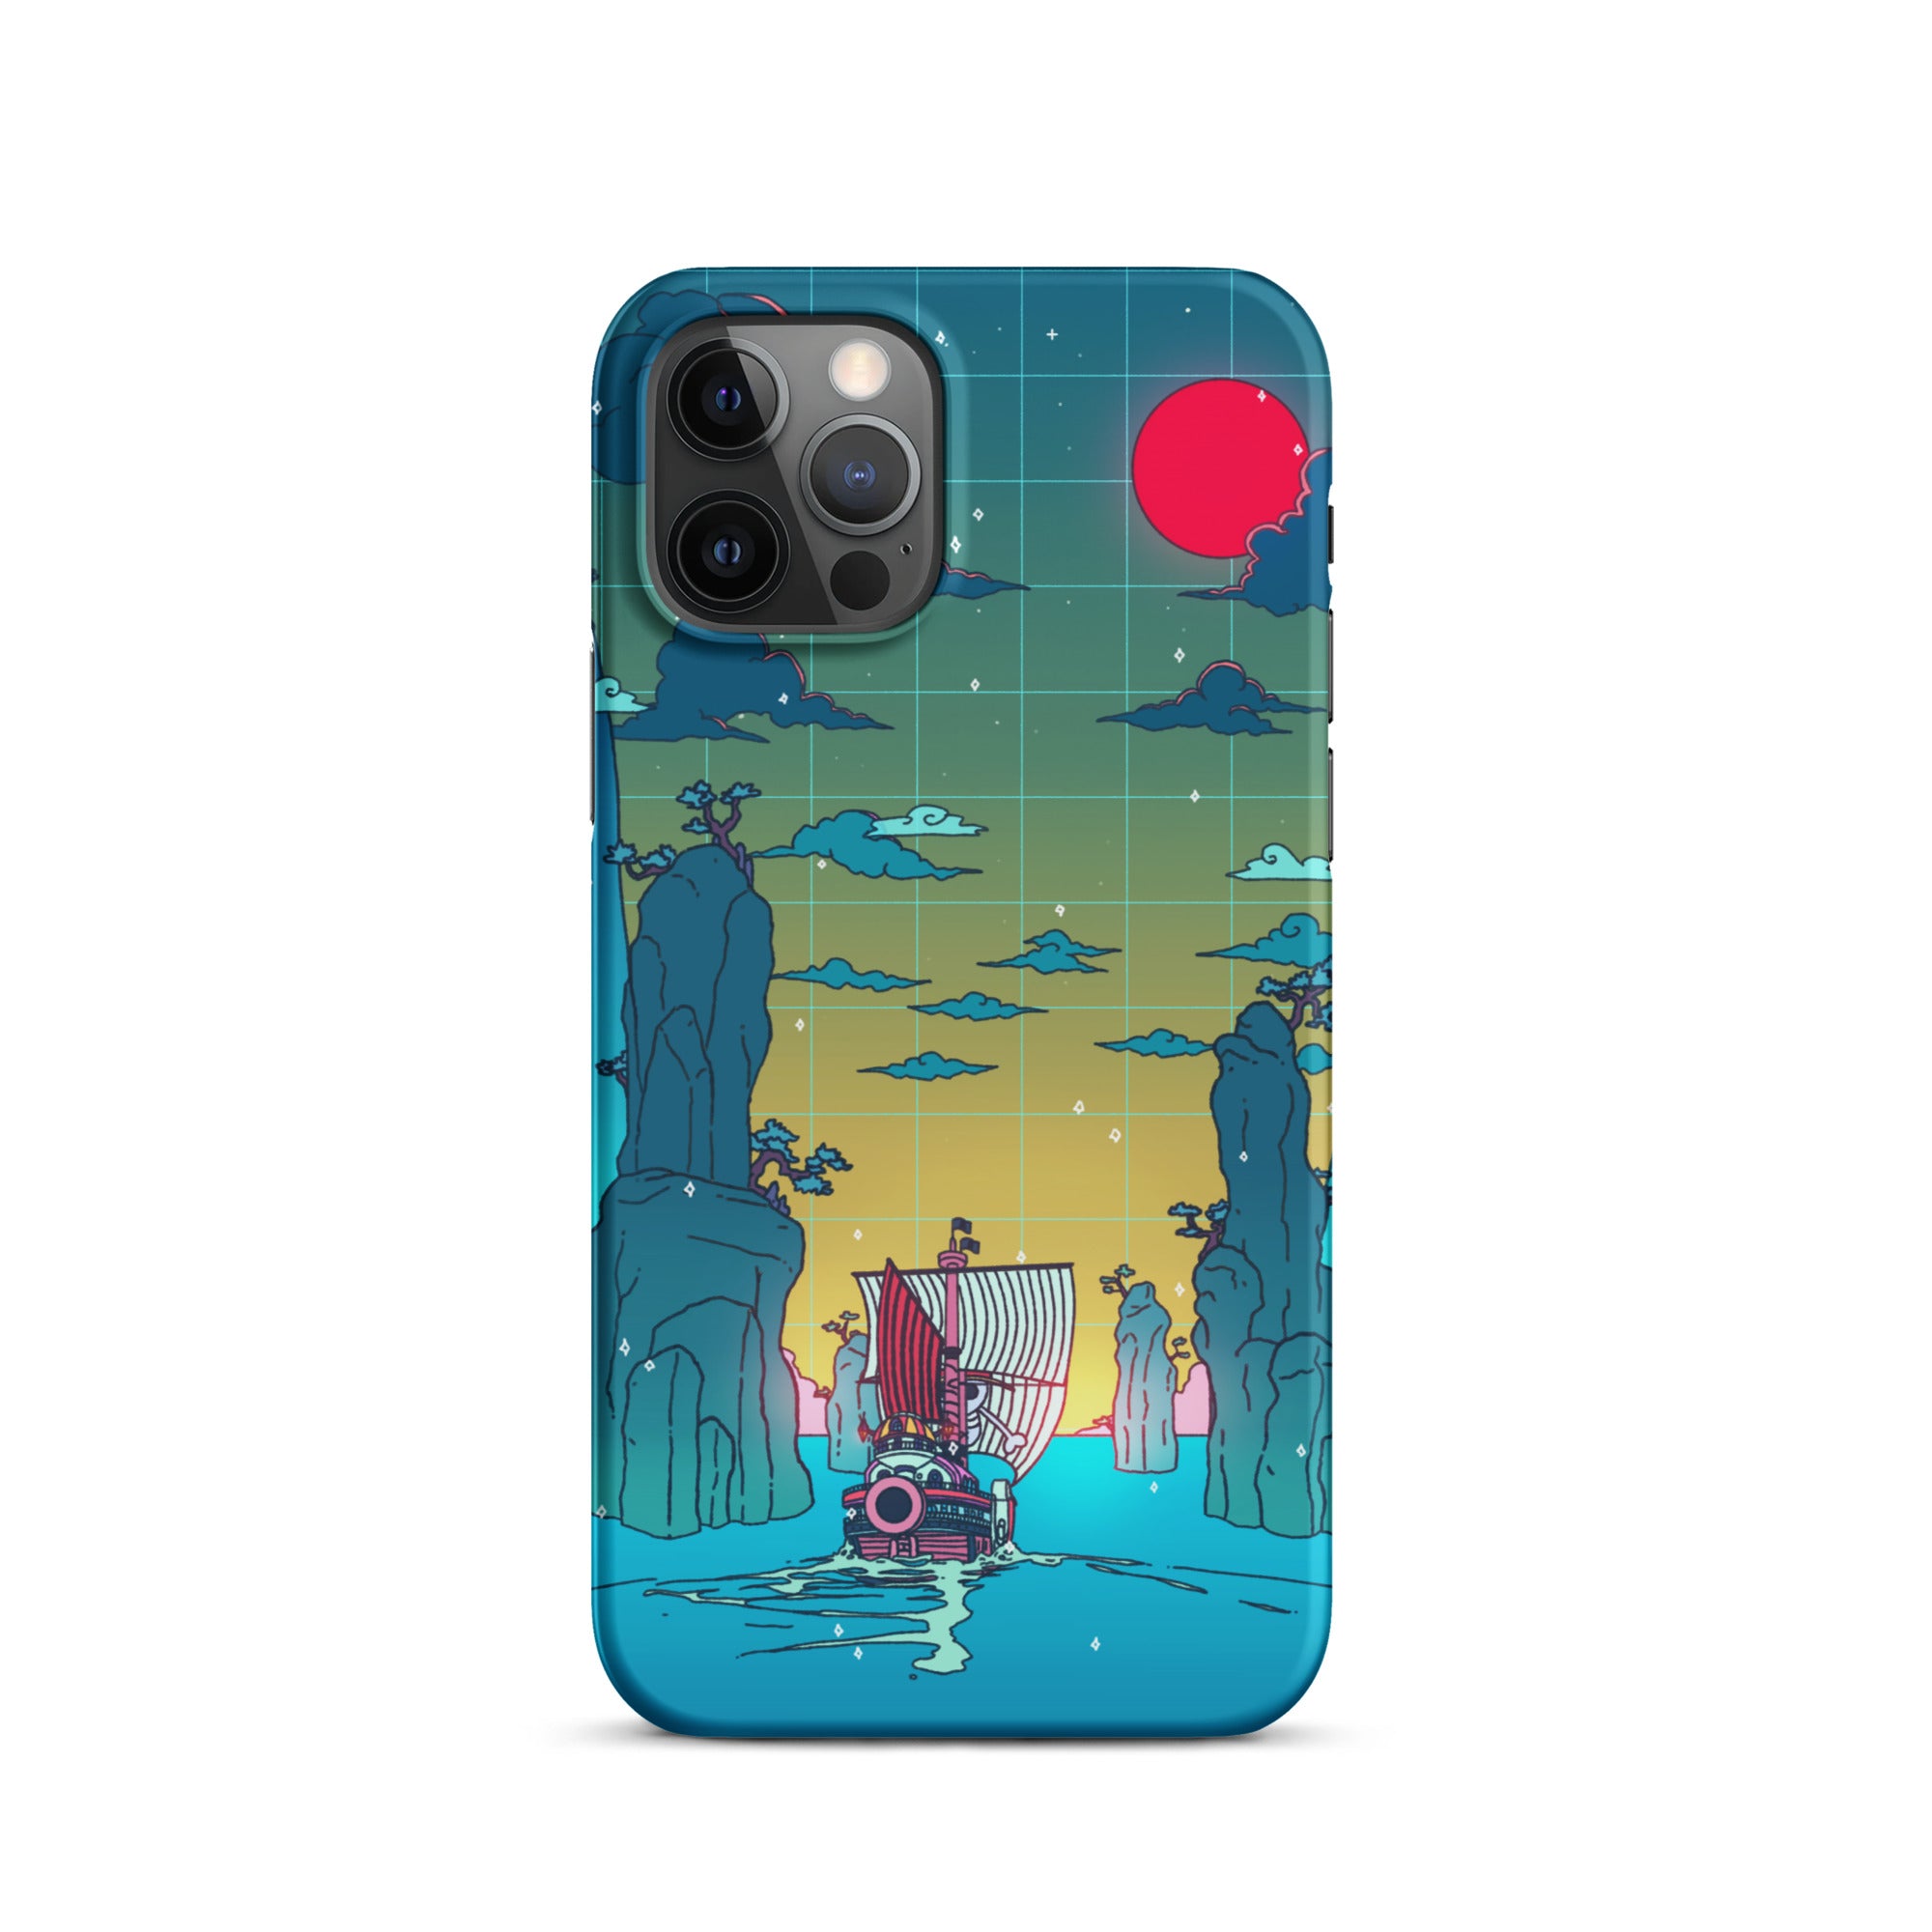 To the Next Adventure iPhone Case